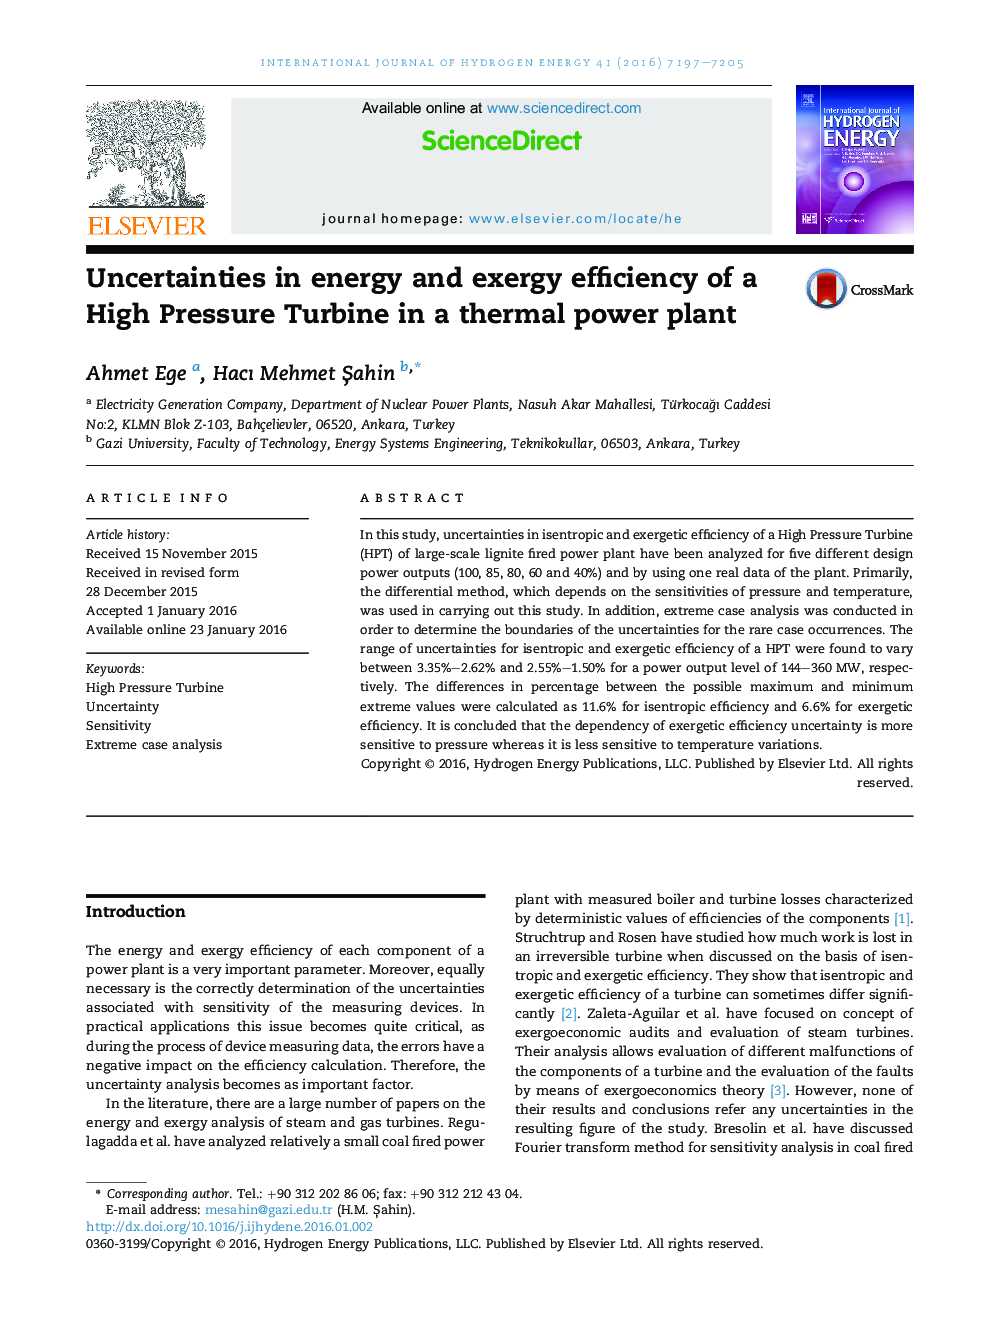 Uncertainties in energy and exergy efficiency of a High Pressure Turbine in a thermal power plant